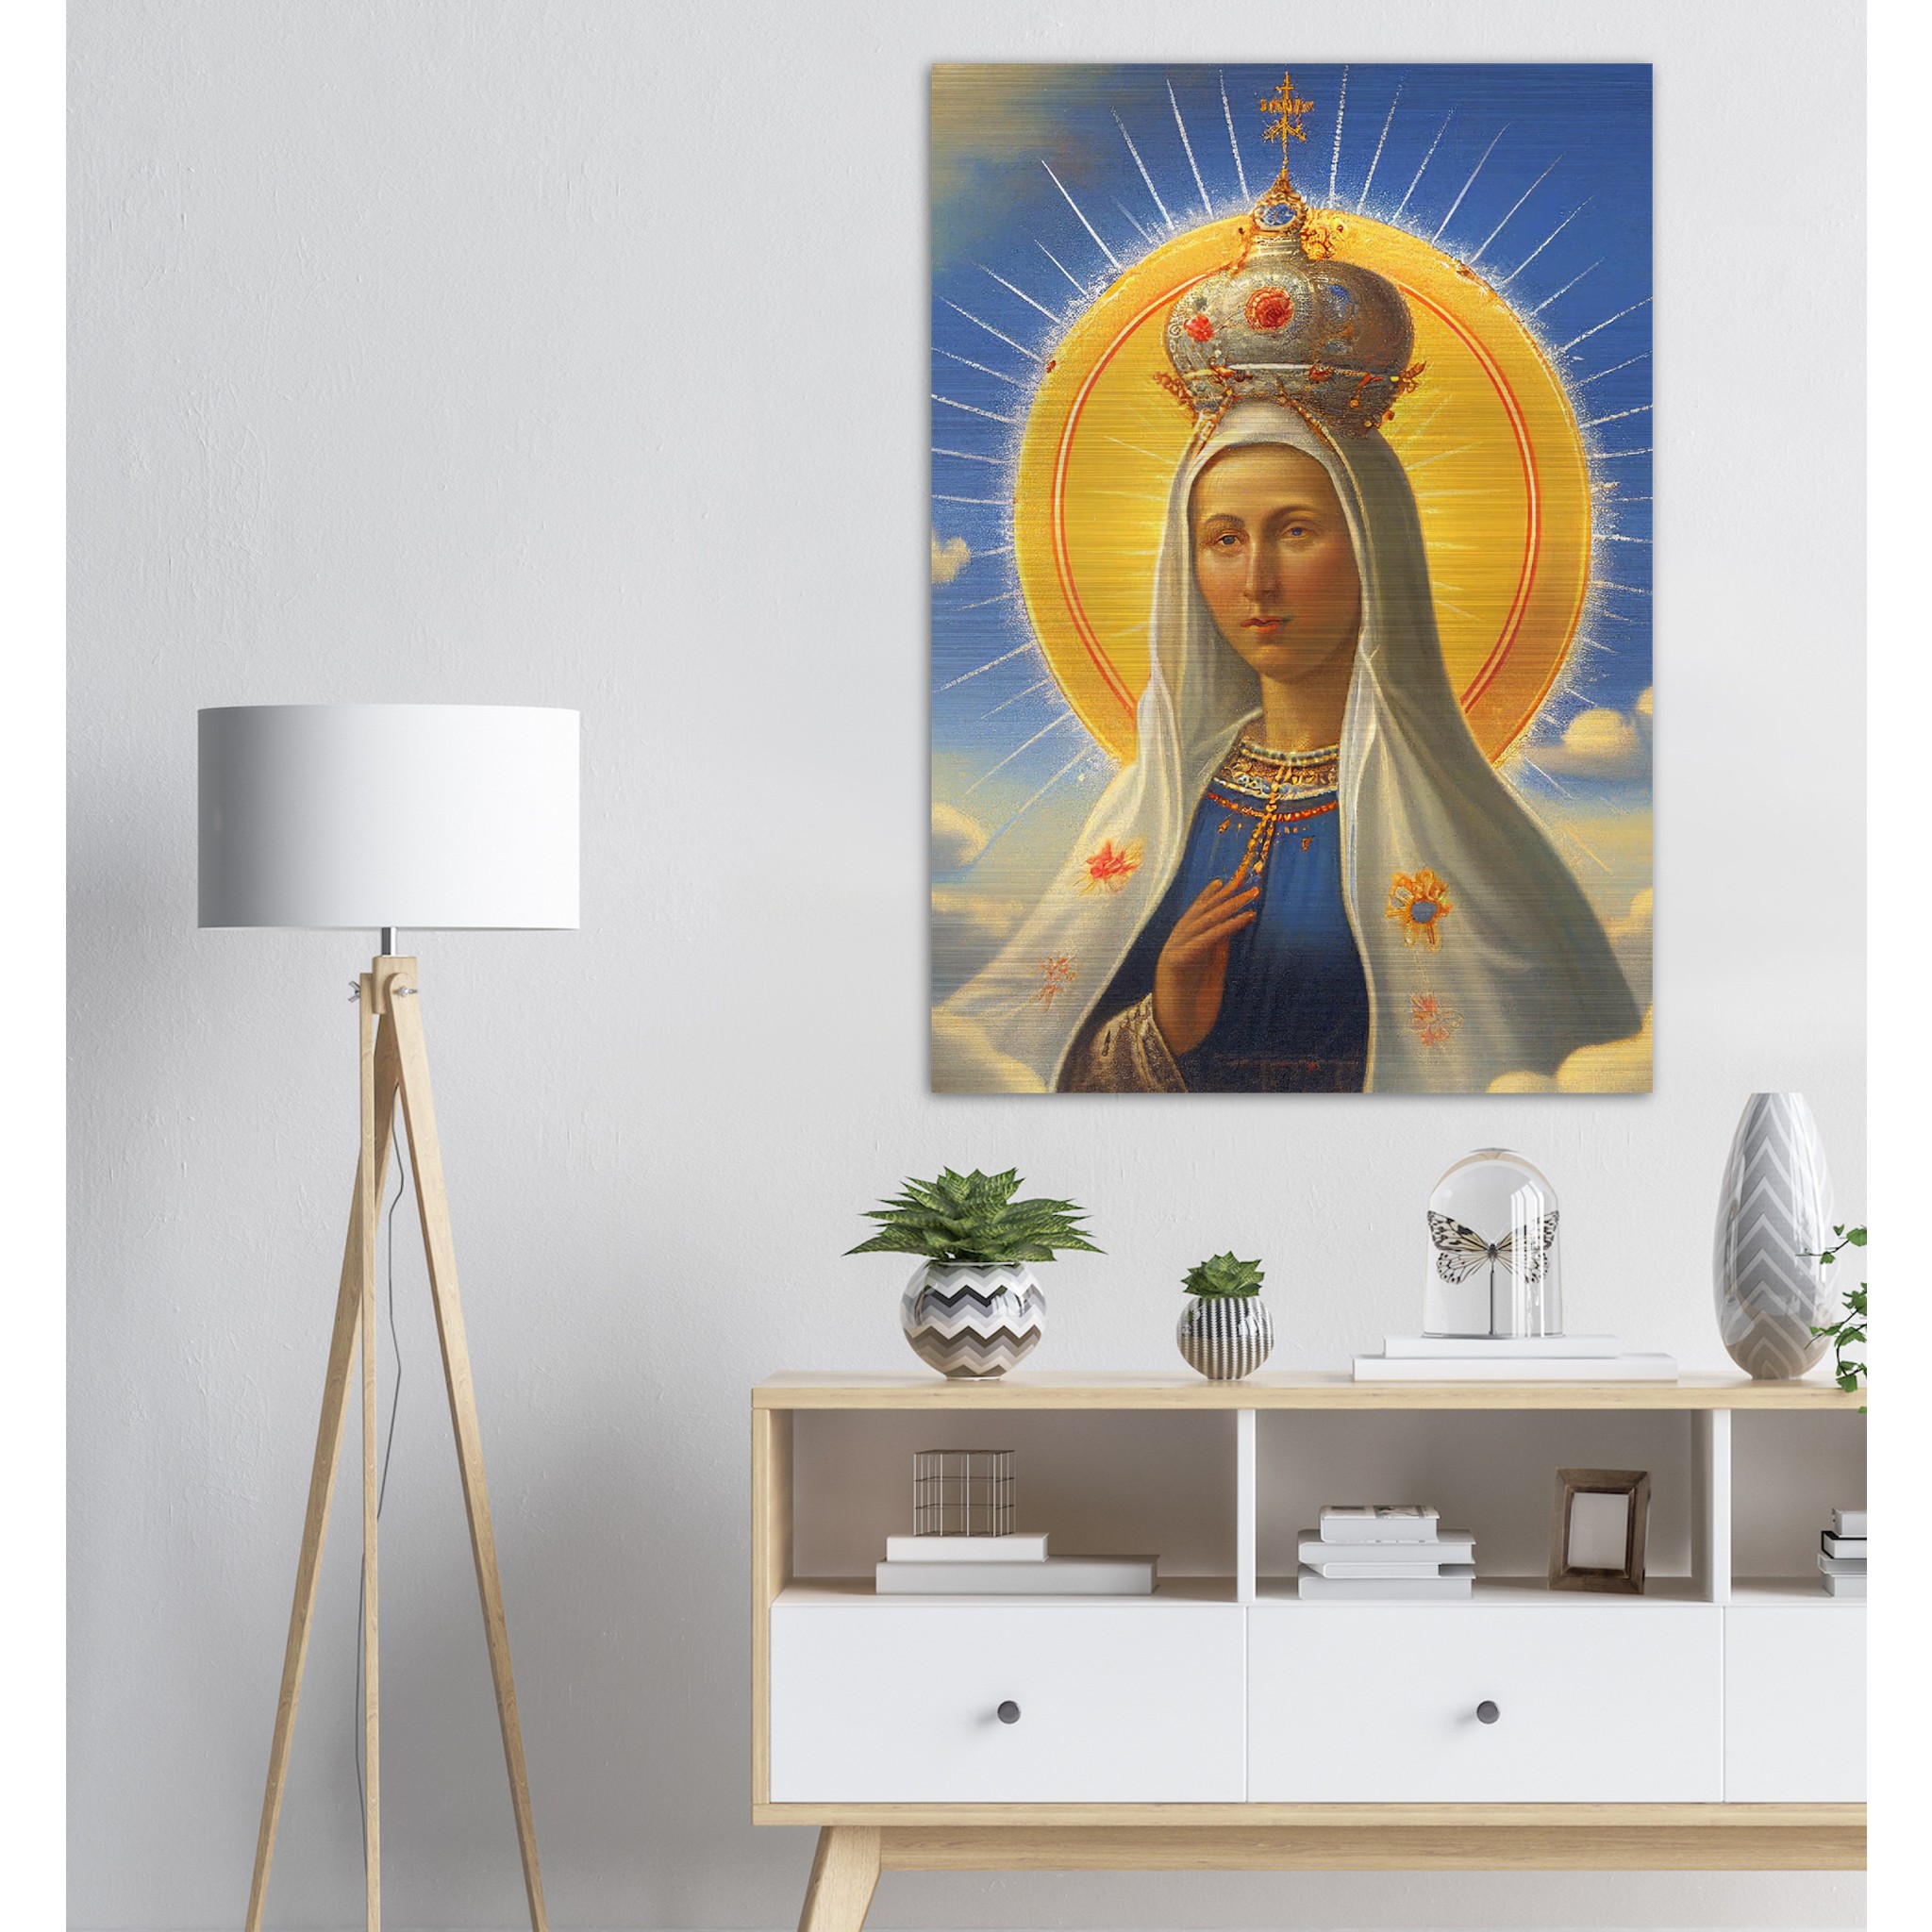 Prayer to Our Lady of Fatima ✠ Brushed Aluminum Icon